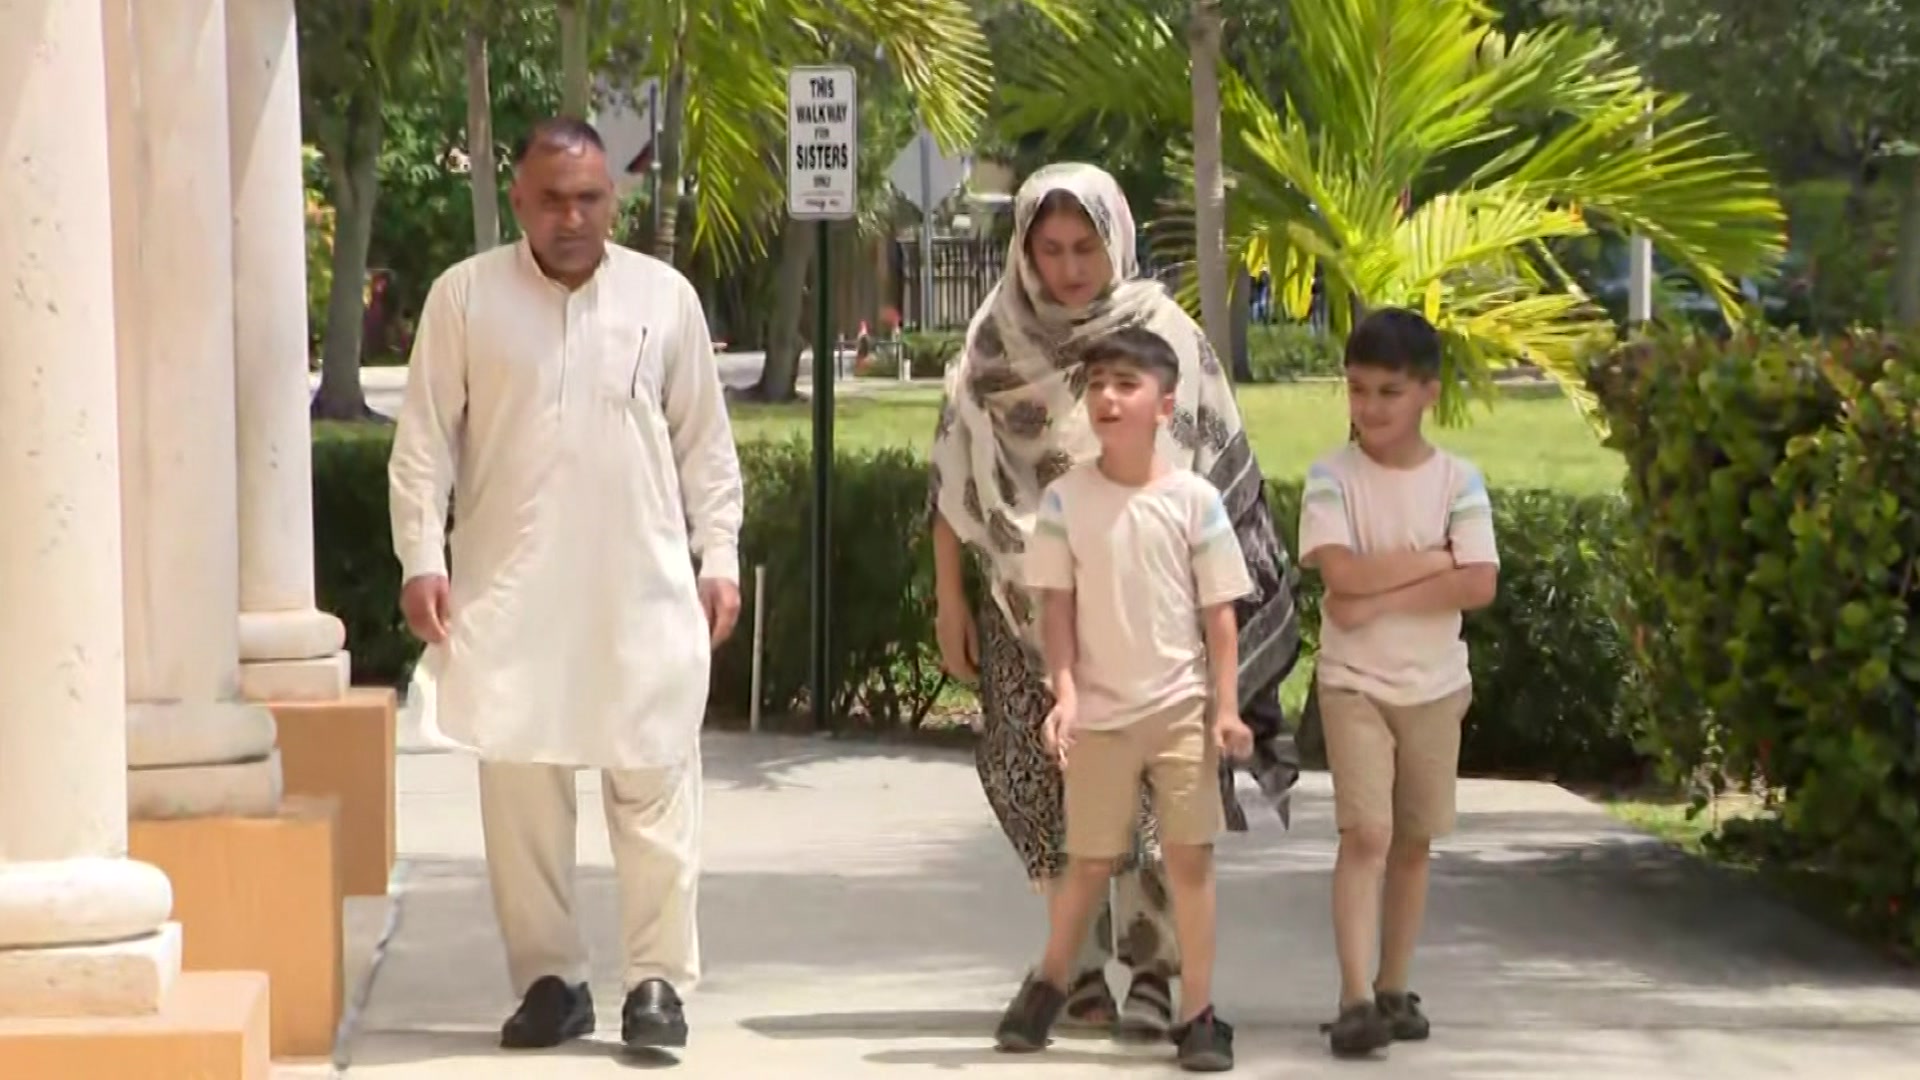 Afghan Family Hopes To Rebuild Life In Miami After Being Forced To Abandon Homeland: ‘We Want To Contribute’